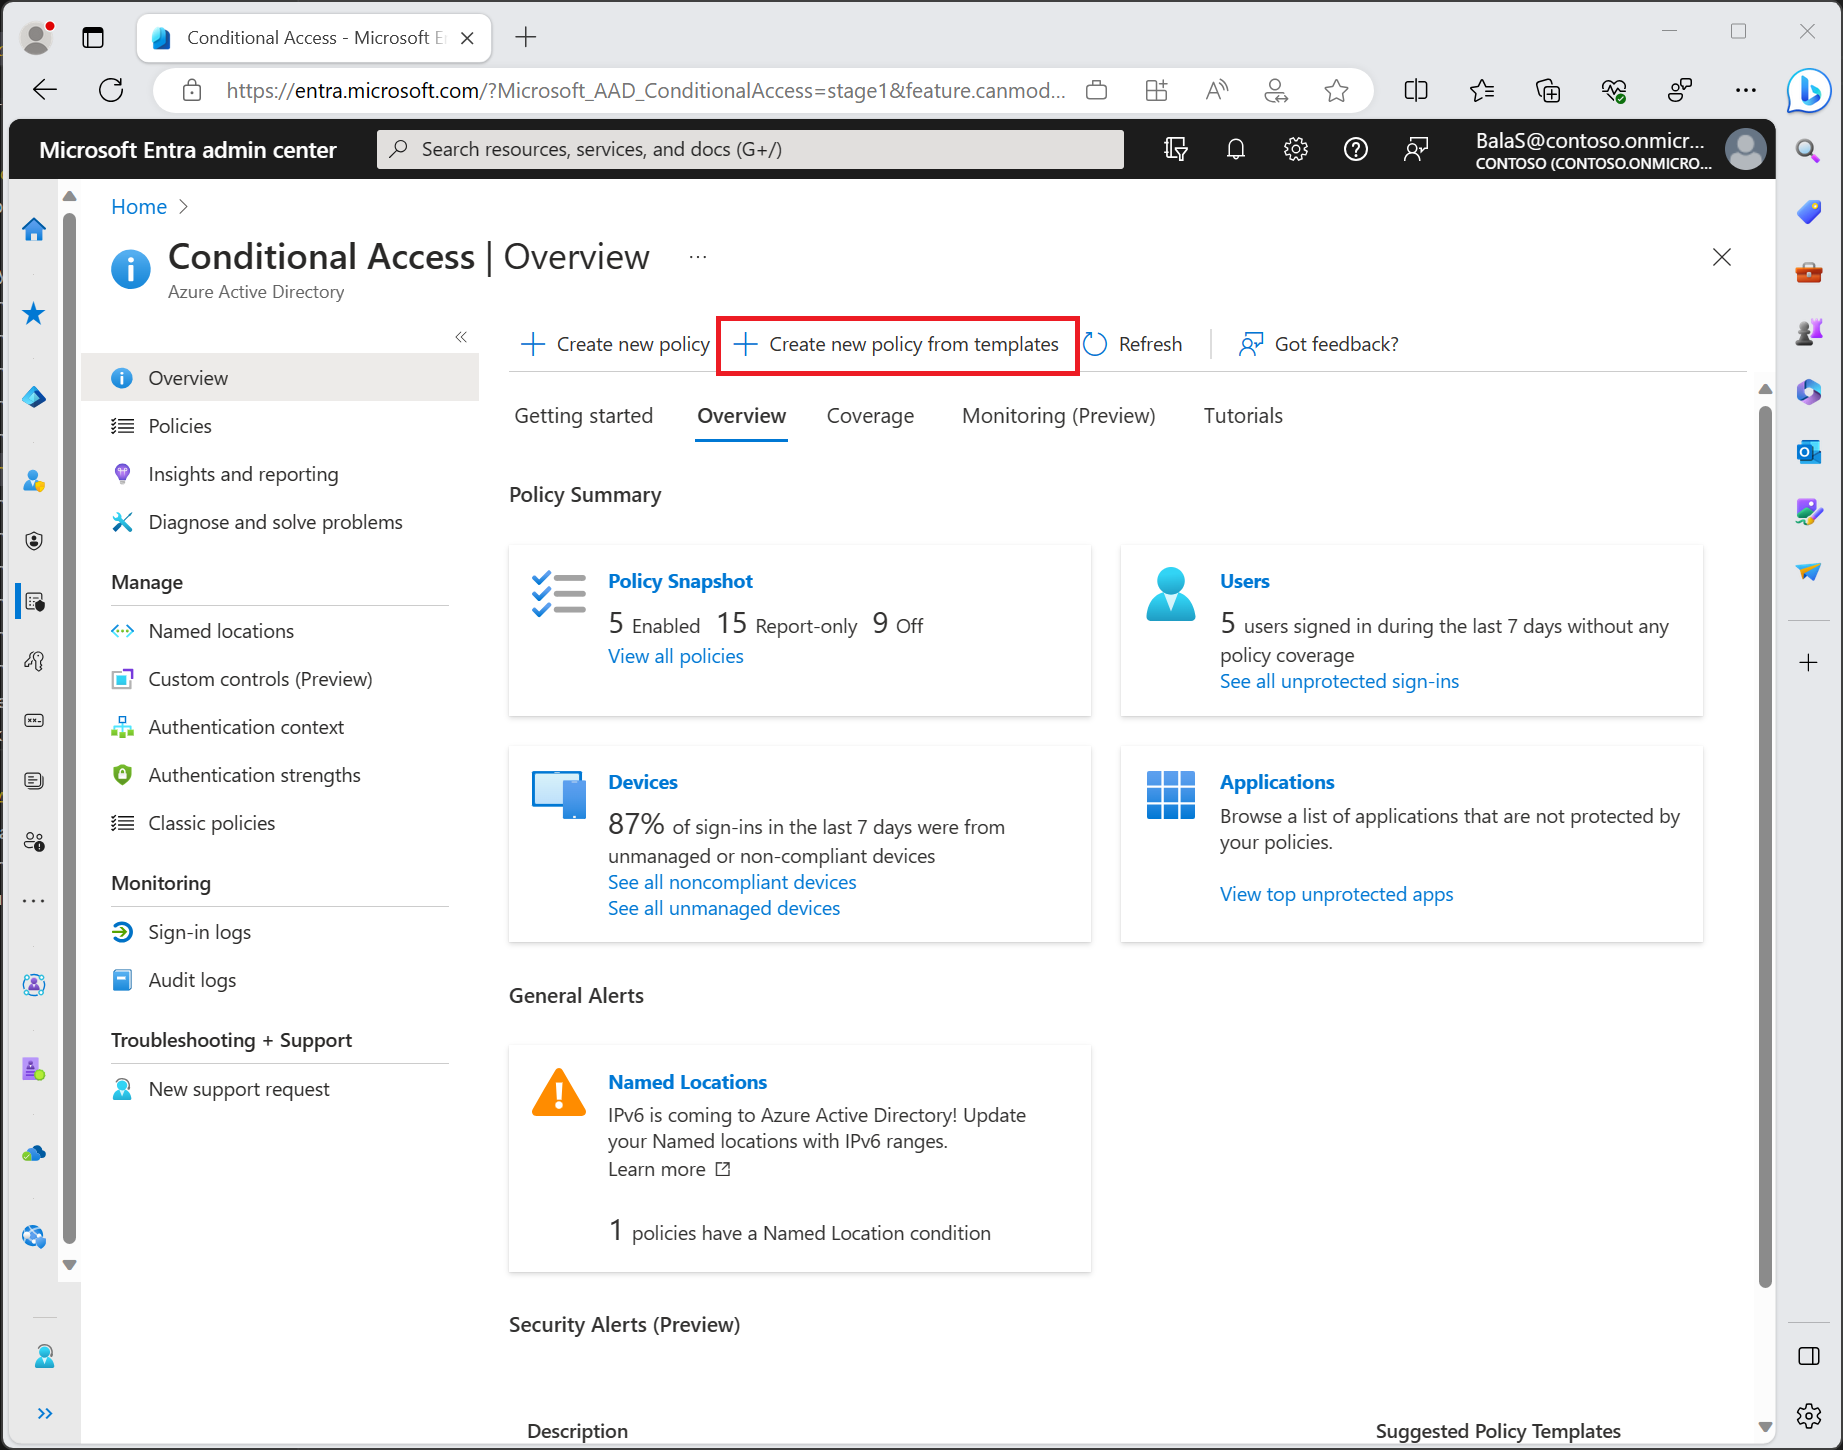 Screenshot that shows Conditional Access policies and templates in the Microsoft Entra admin center.